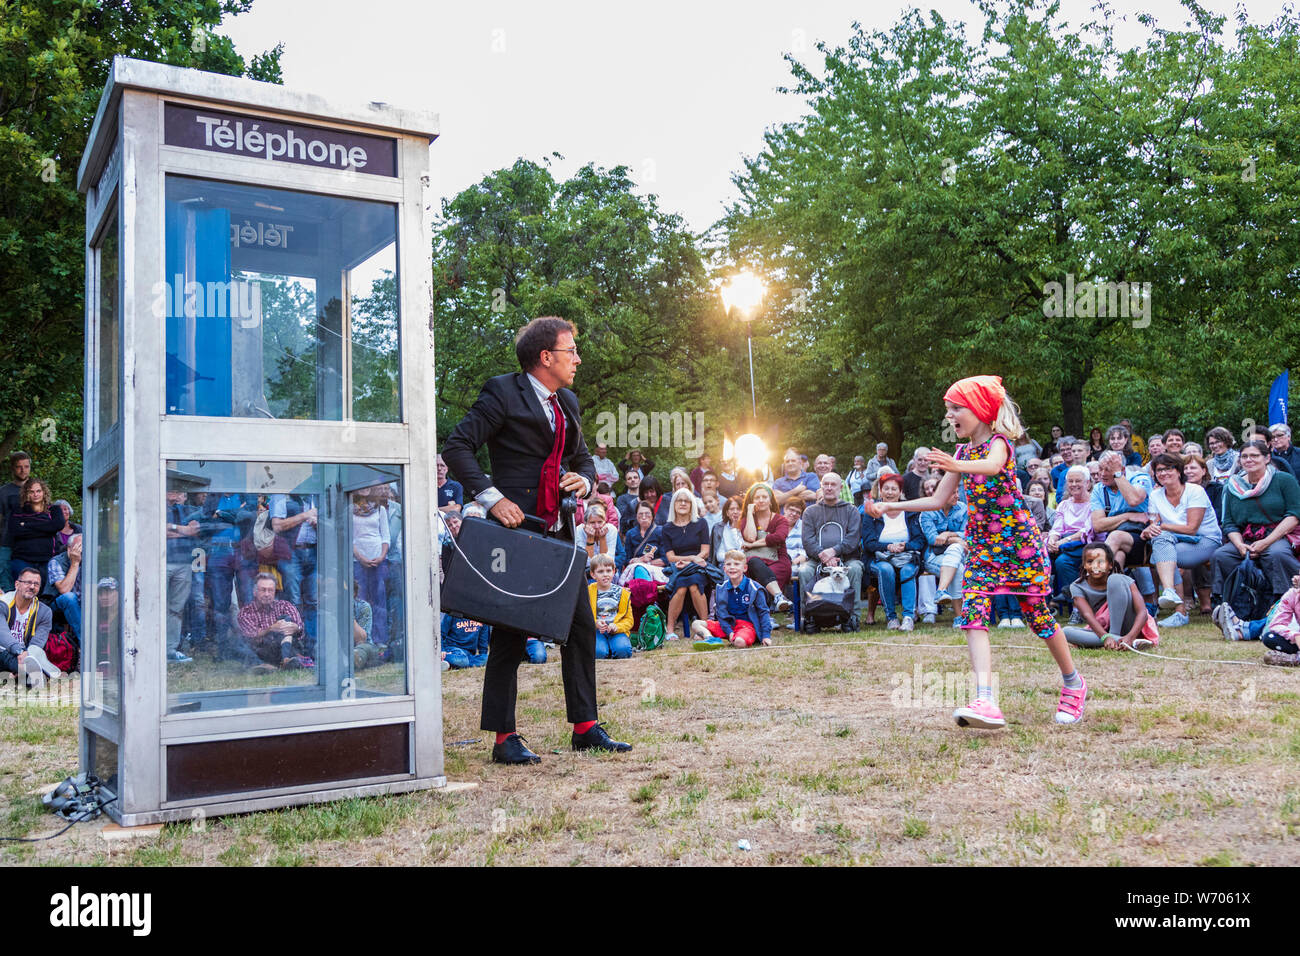 Mülheim an der Ruhr, Germany. 3 August 2019. Frenchman Ivan Chary of the Compagnie du Petit Monsieur tries to get into a closed telephone box and receives help from a young member of the audience. The 11th Broicher Schlossnacht takes places with performances ranging from dance to arts and theatre at MüGa-Park. Photo: Vibrant Pictures/Alamy Live News Stock Photo